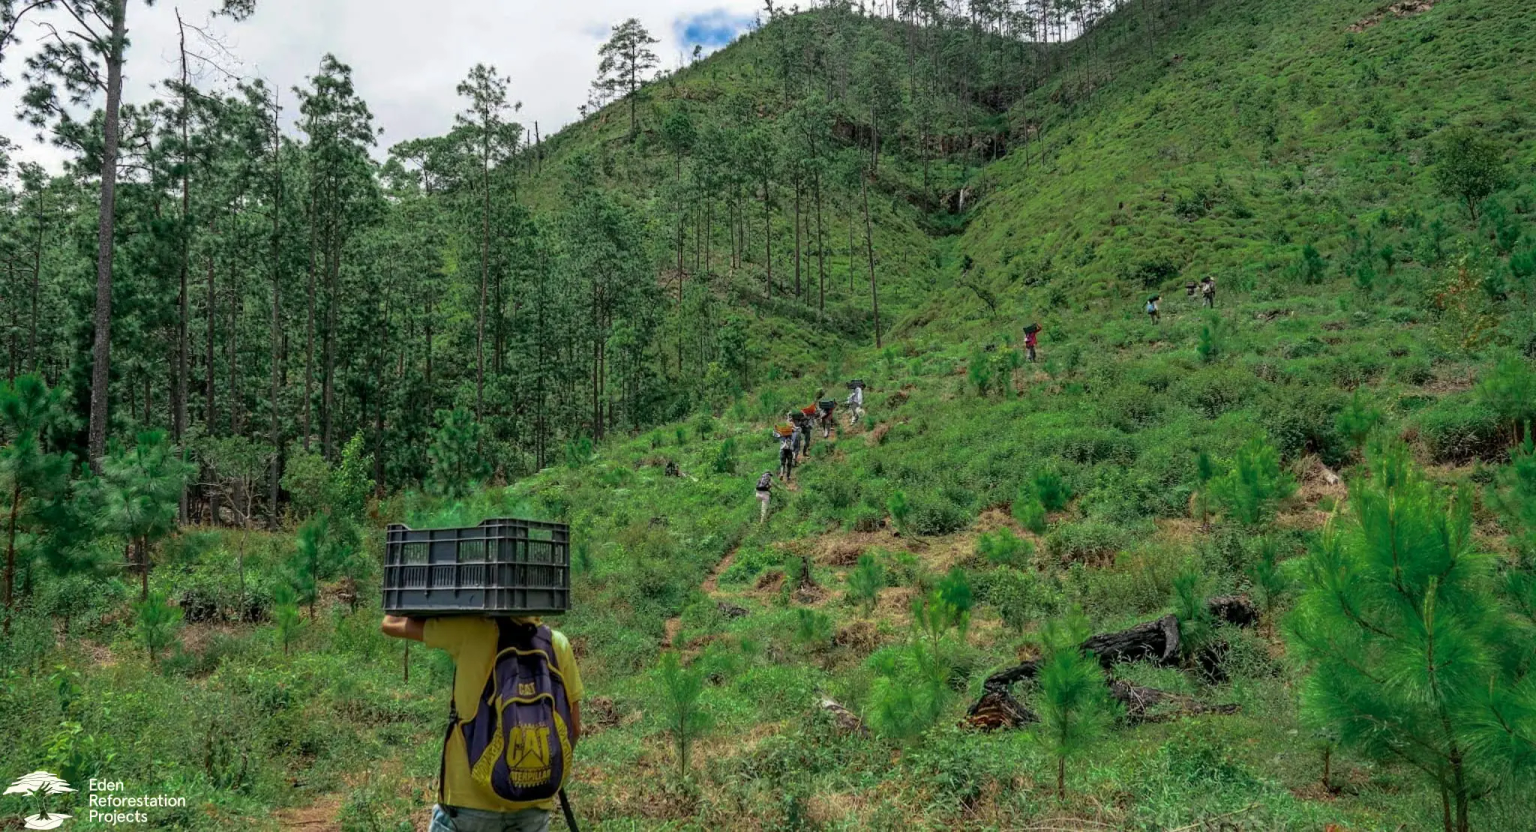 A group of tree planters hiking up a hill with boxes of tree seedlings